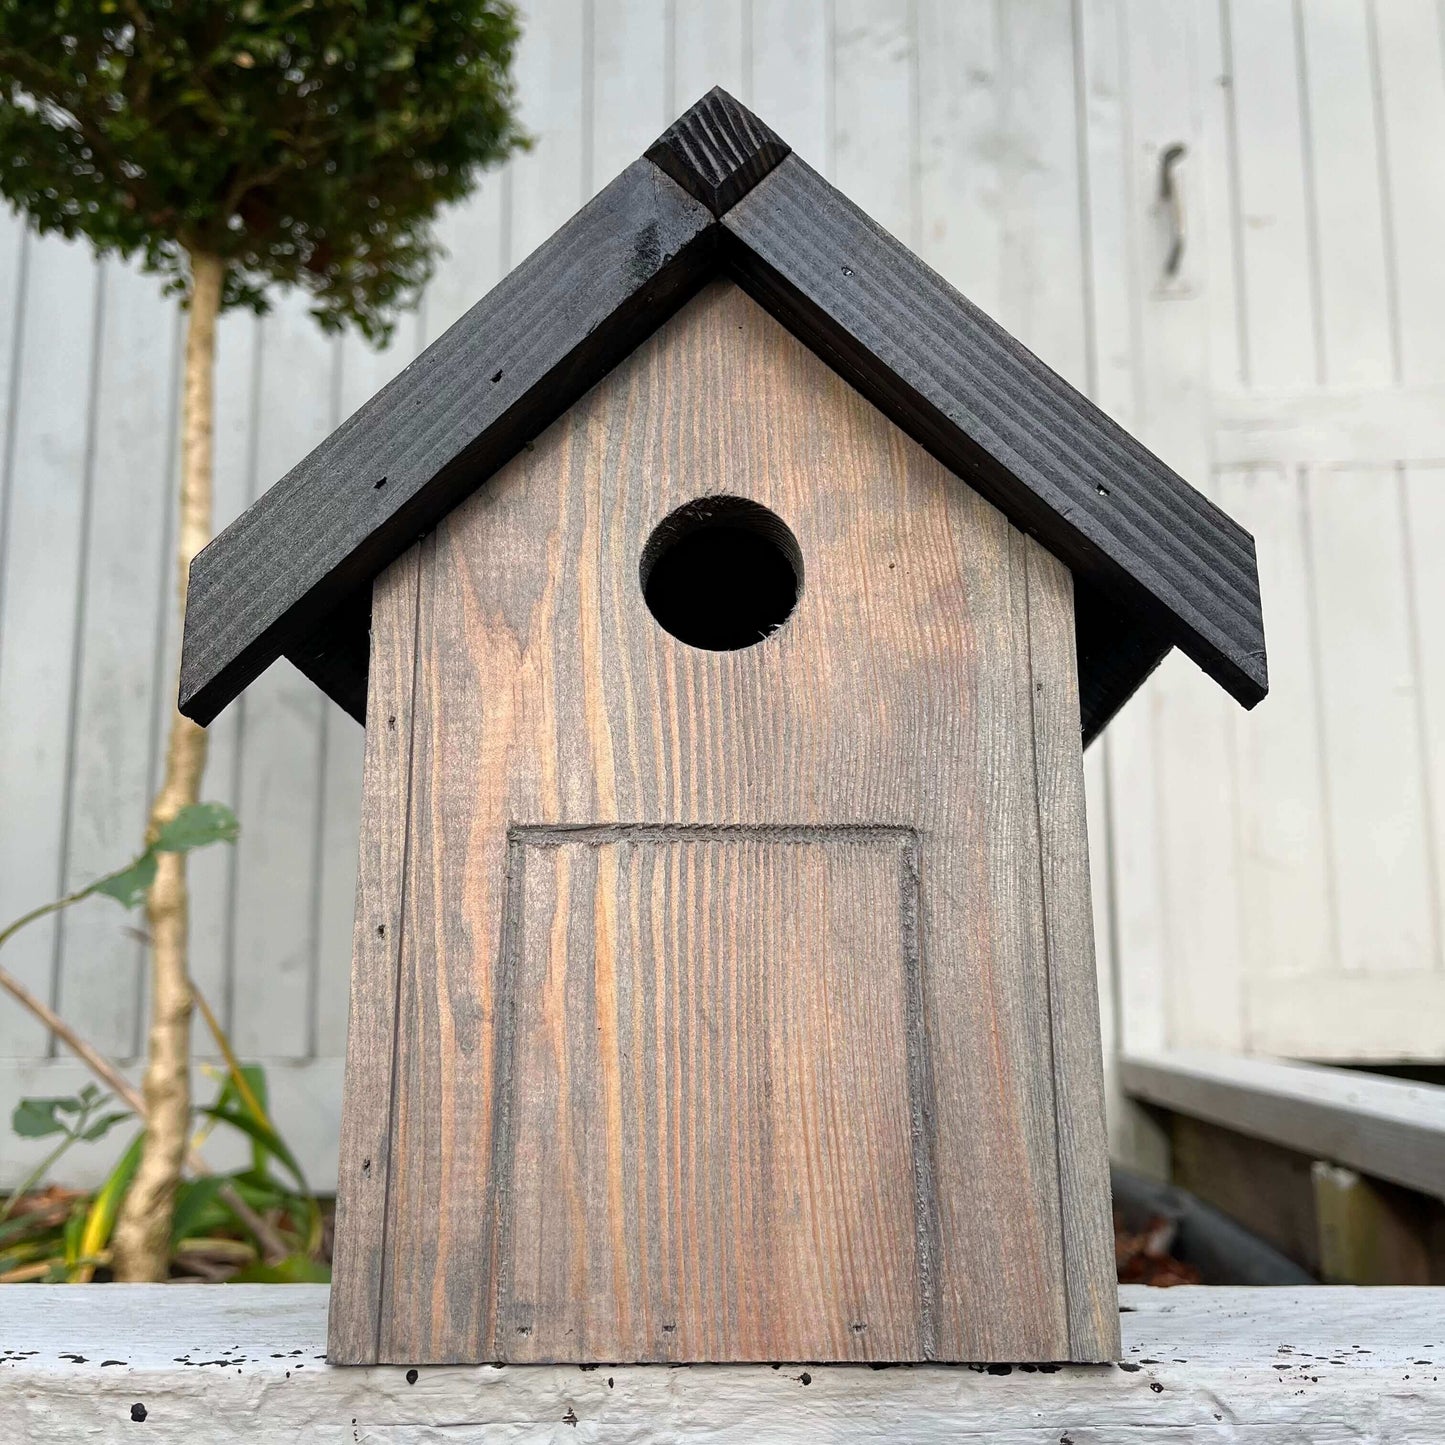 Garden bird nest box is suitable for Blue Tits, Great Tits, Coal Tits and Long-tailed Tits